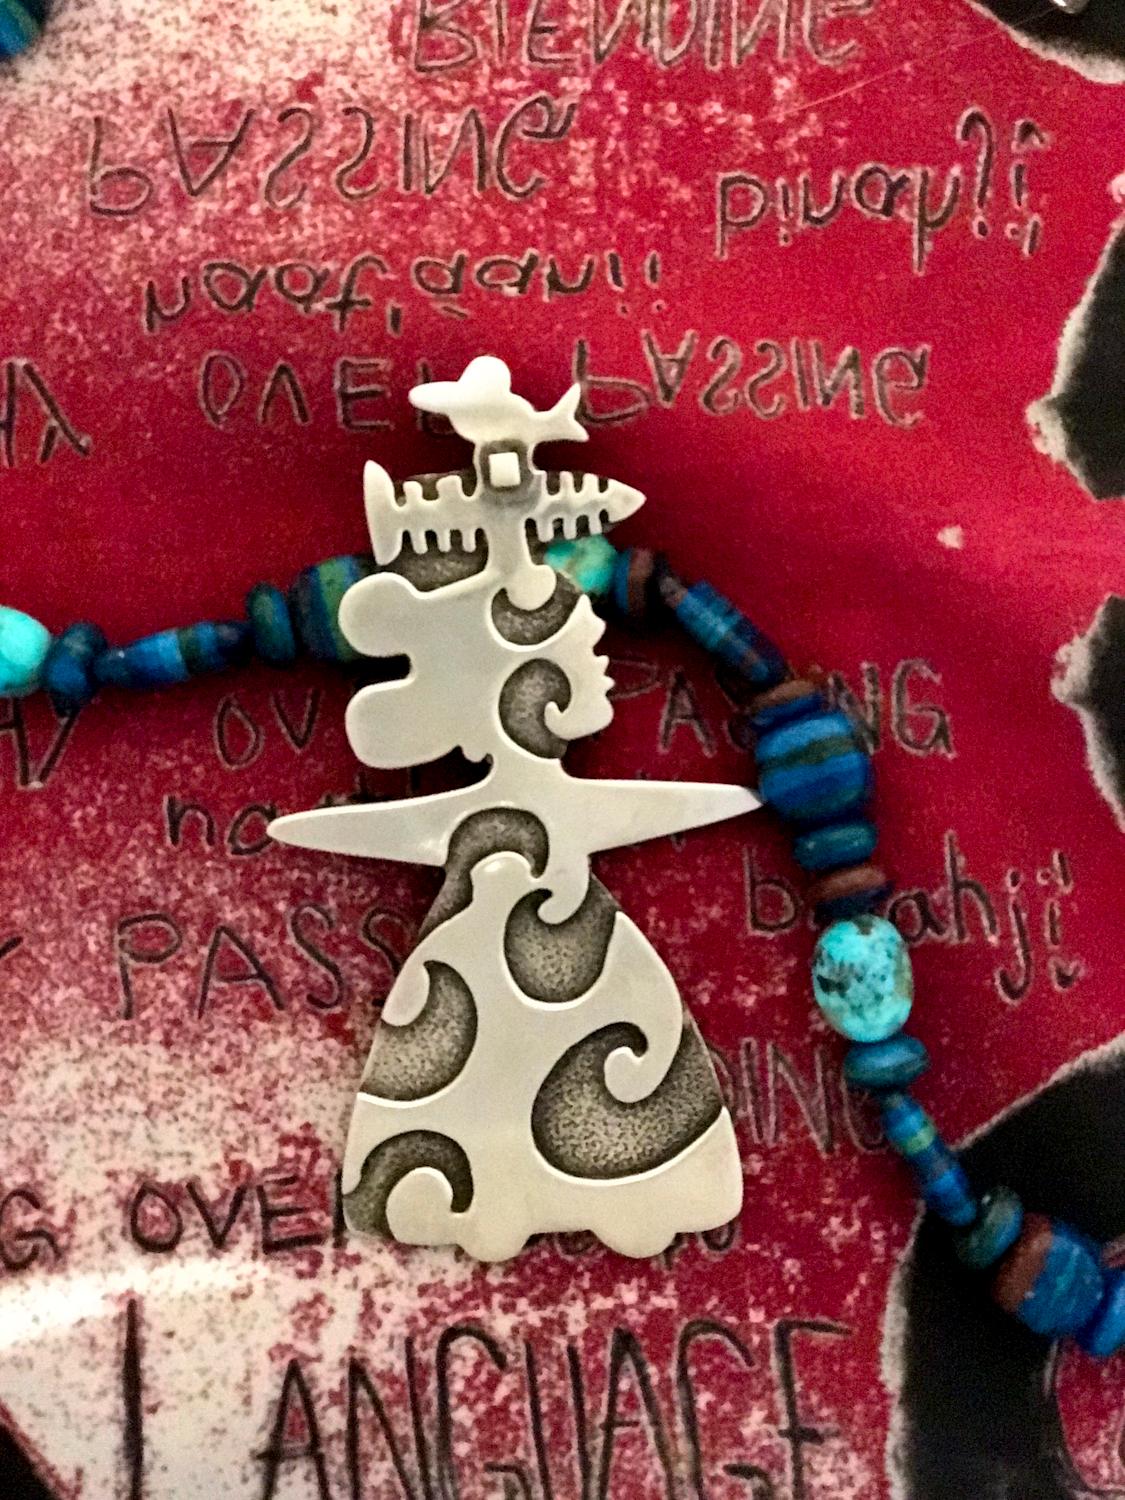 She Sings, pendant enhancer, Melanie Yazzie designs silver Navajo bird fish lady

Melanie A. Yazzie (Navajo-Diné) is a highly regarded multimedia artist known for her printmaking, paintings, sculpture, and jewelry designs.

She has exhibited,